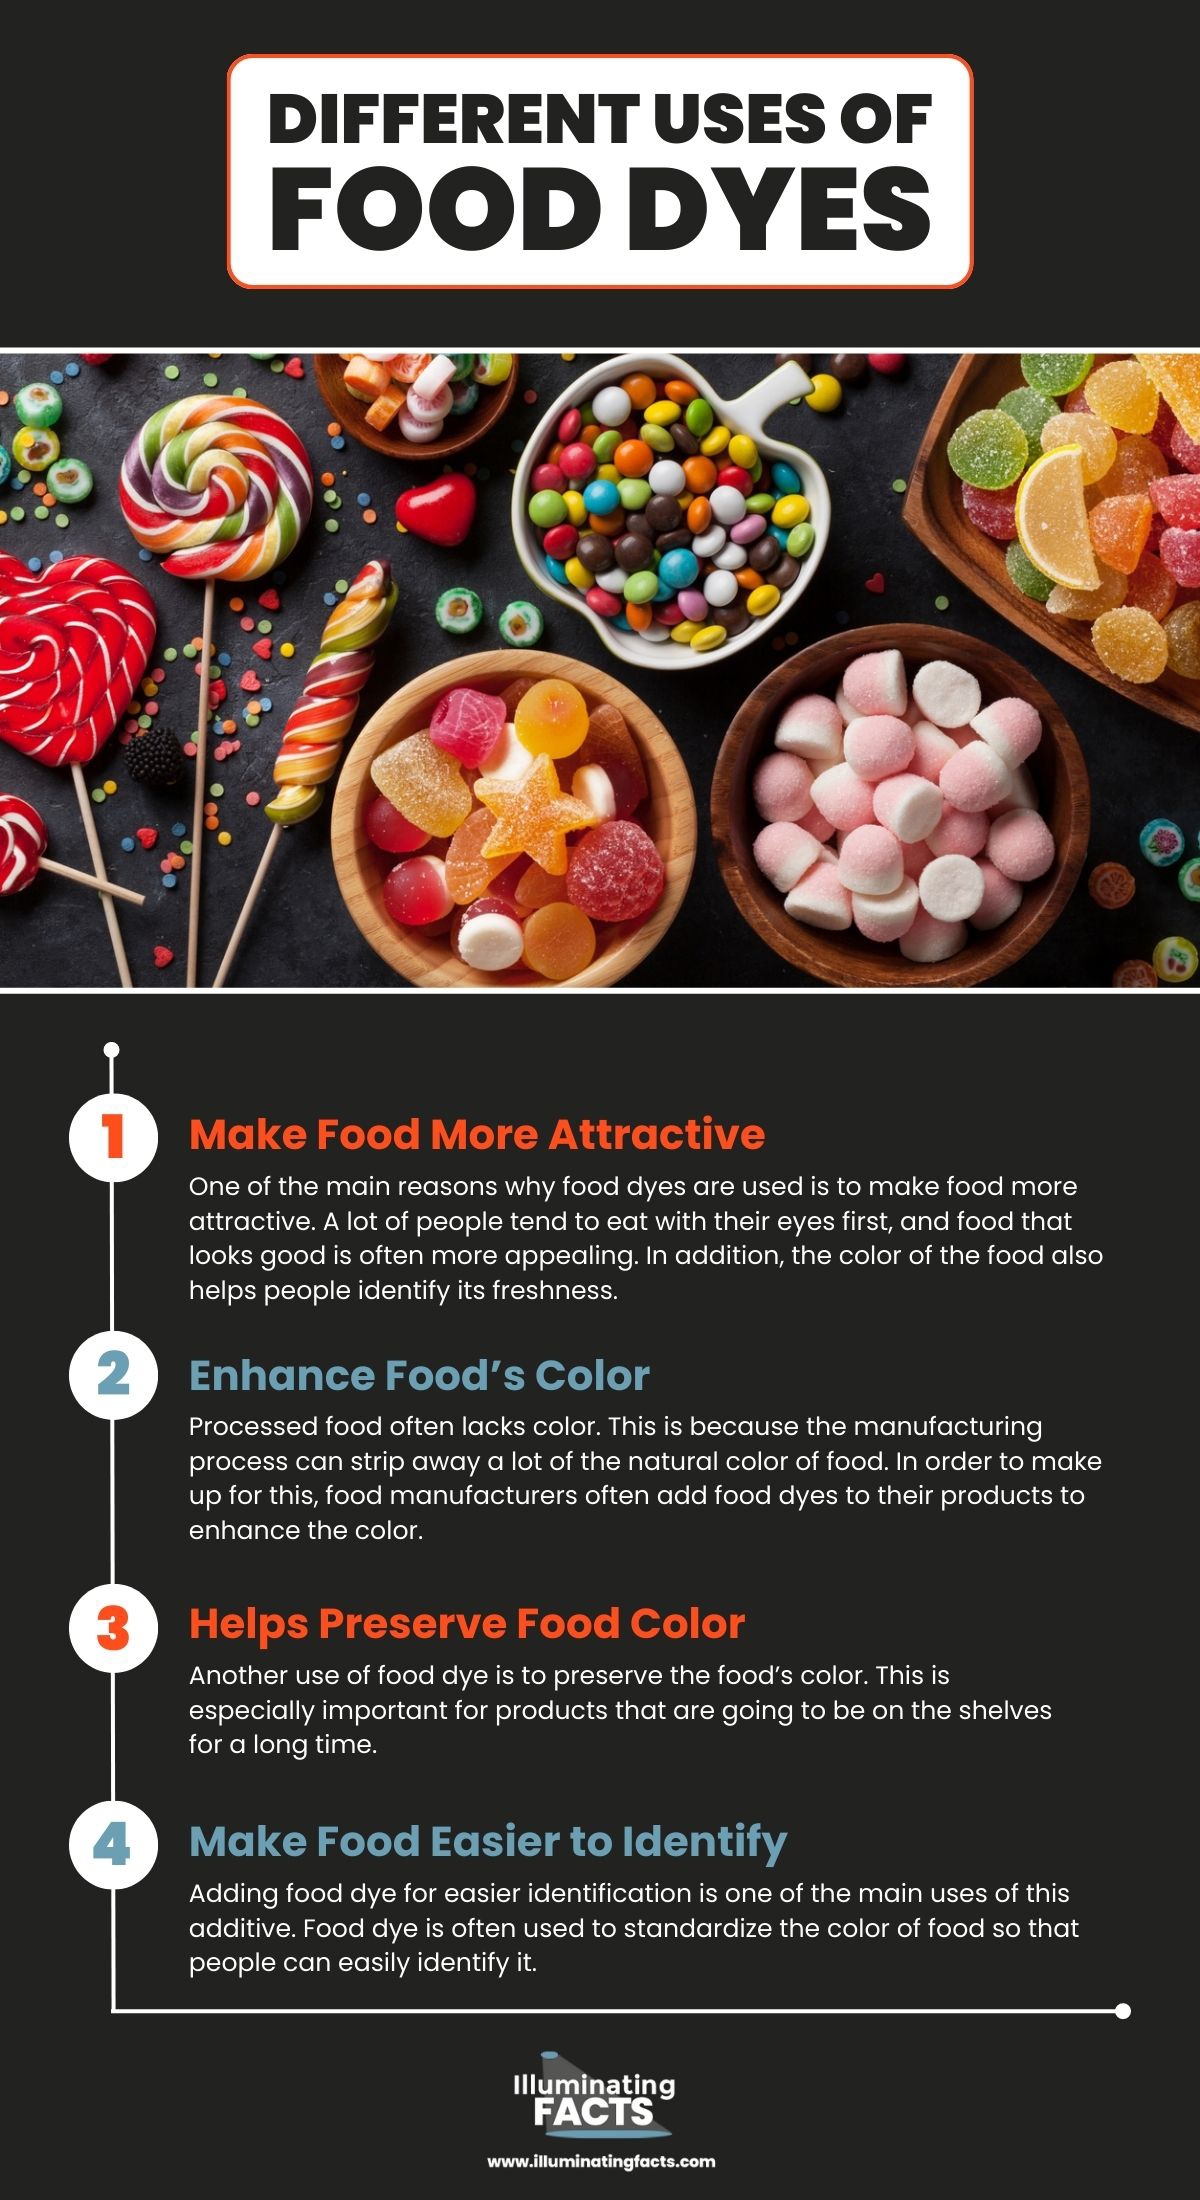 Different Uses of Food Dyes